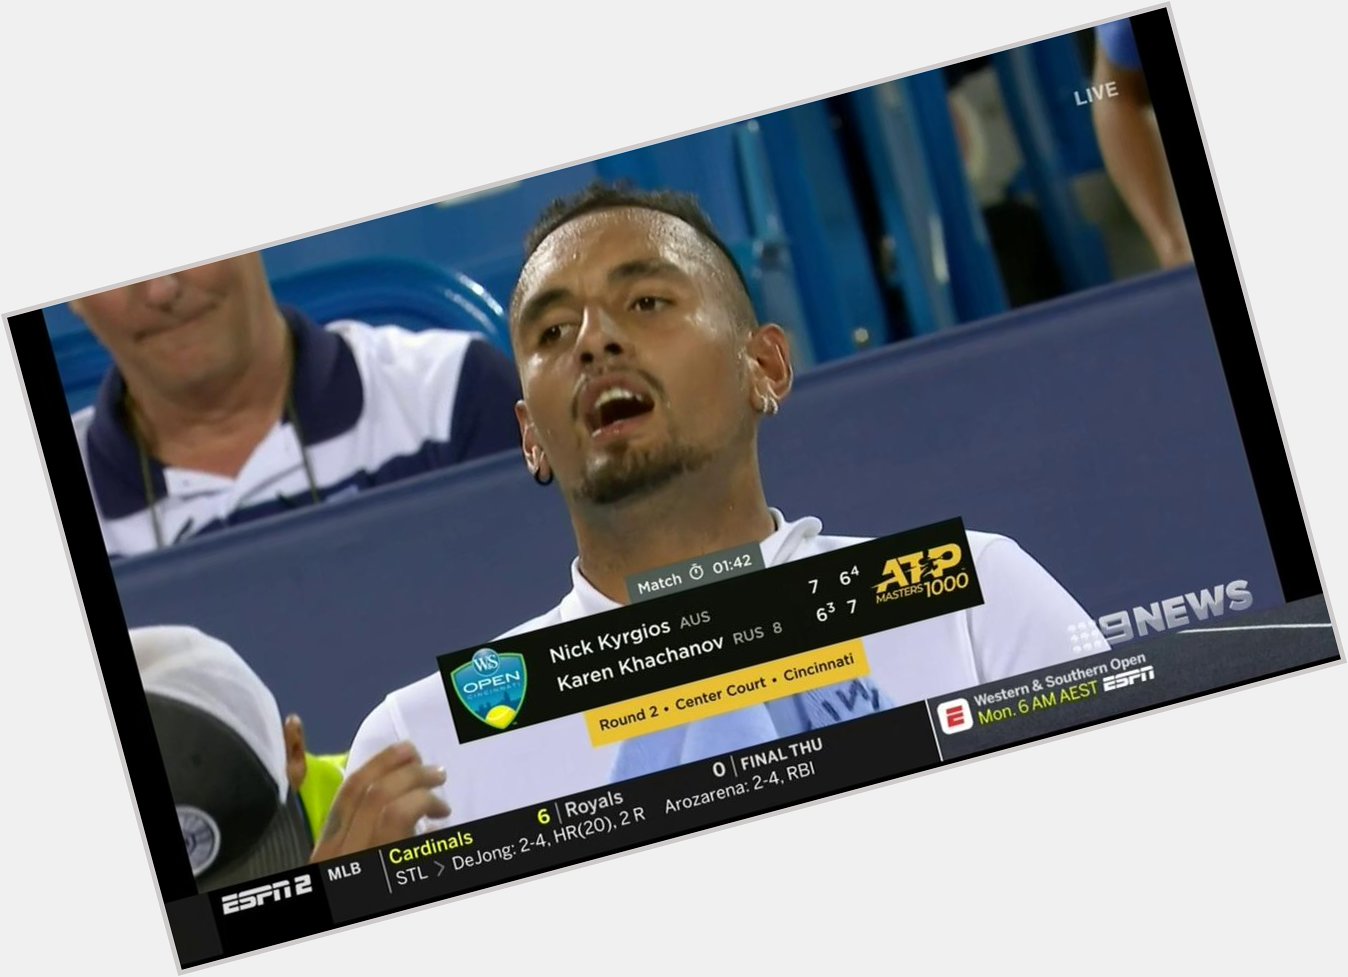  Happy birthday Nick Kyrgios. The gift that keeps giving...

